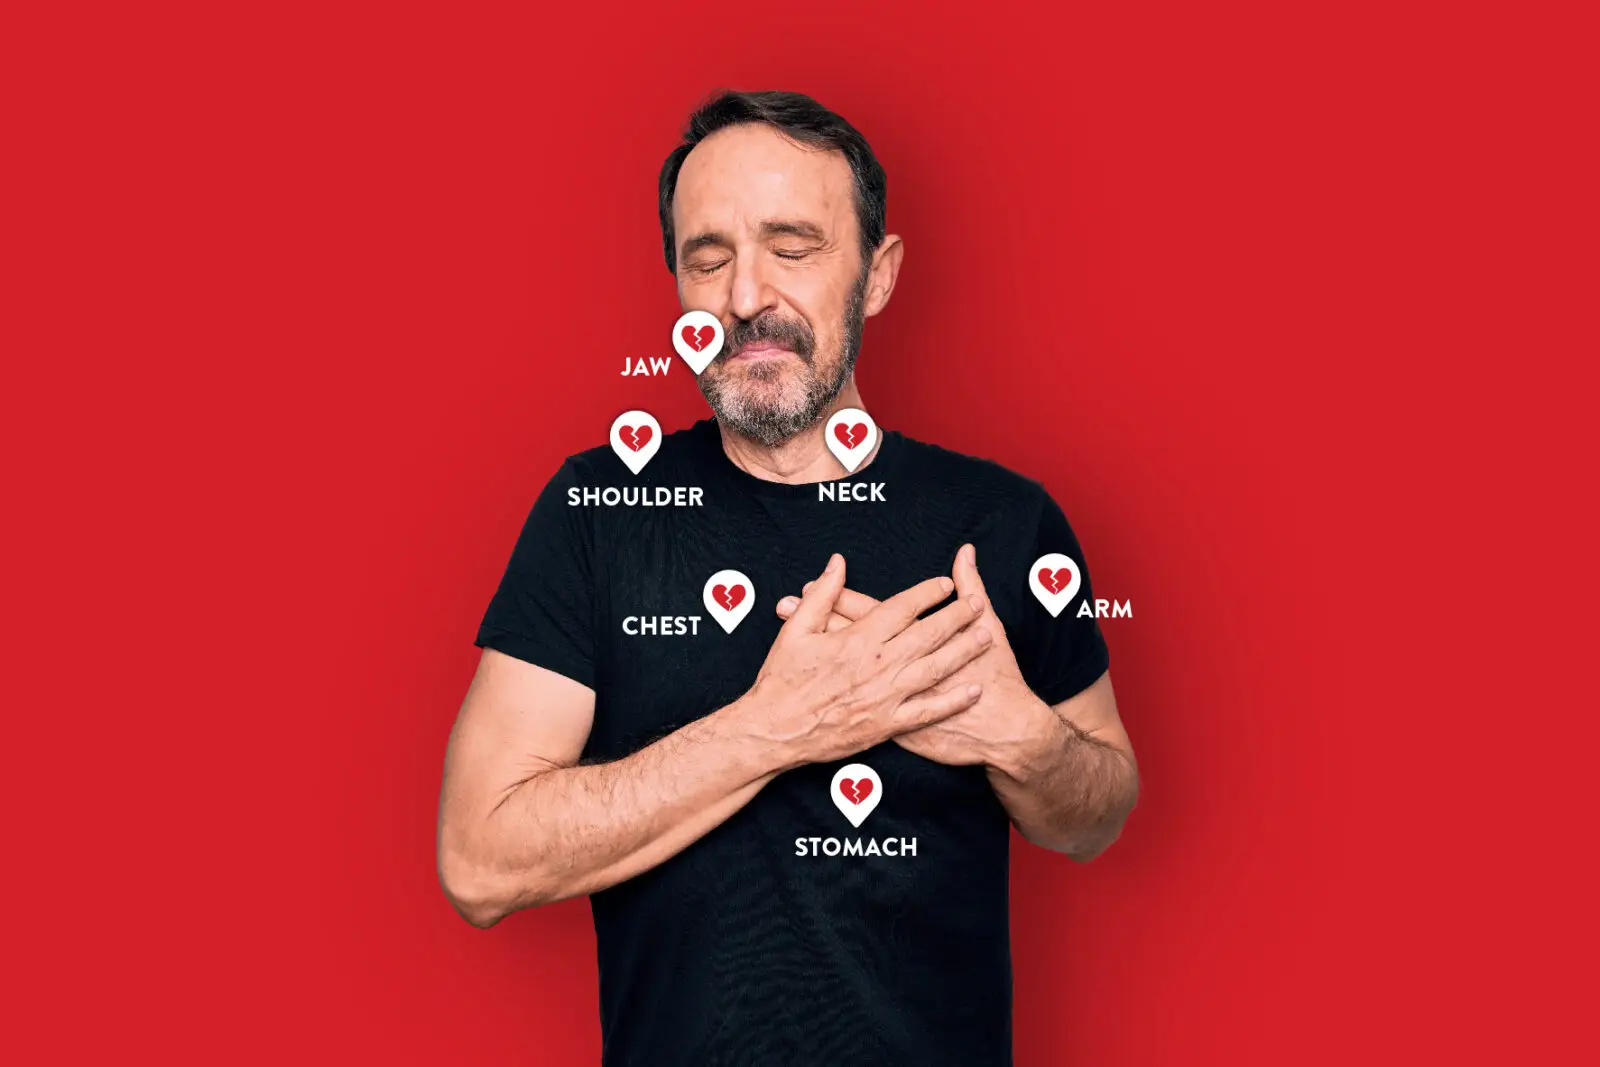 A man holding his heart wearing a black t-shirt and with a red background